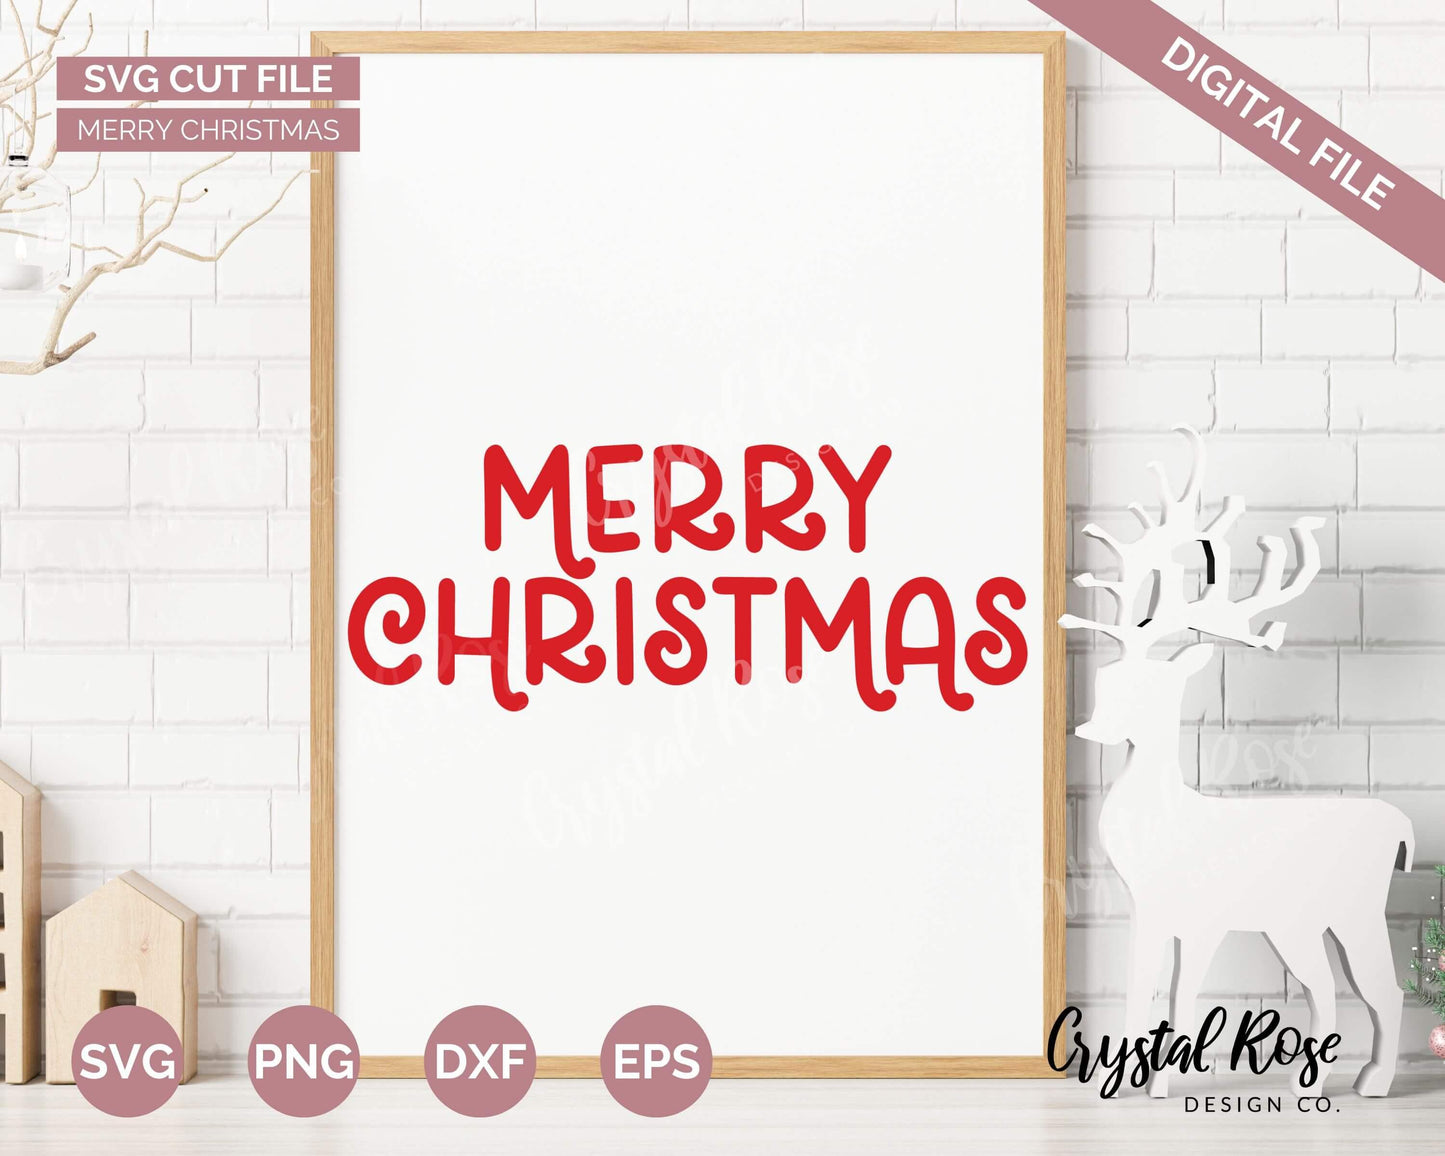 Merry Christmas SVG, Christmas SVG, Digital Download, Cricut, Silhouette, Glowforge (includes svg/png/dxf/eps) - Crystal Rose Design Co.